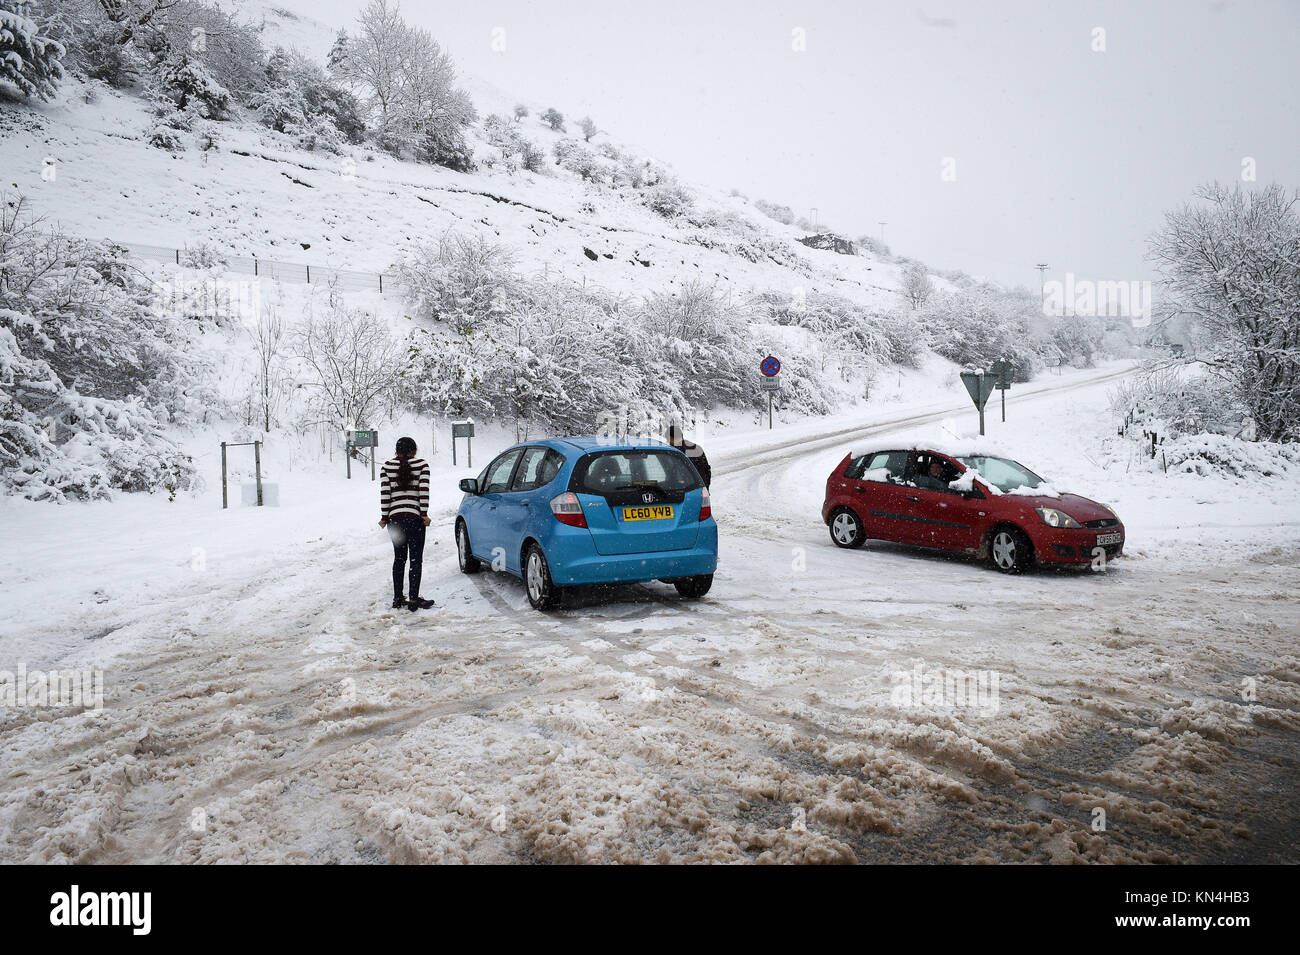 People turn their cars around near a road closure on the A470 from Merthyr Tydfil to Brecon, Wales, as heavy snowfall across parts of the UK is causing widespread disruption, closing roads and grounding flights at an airport. Stock Photo